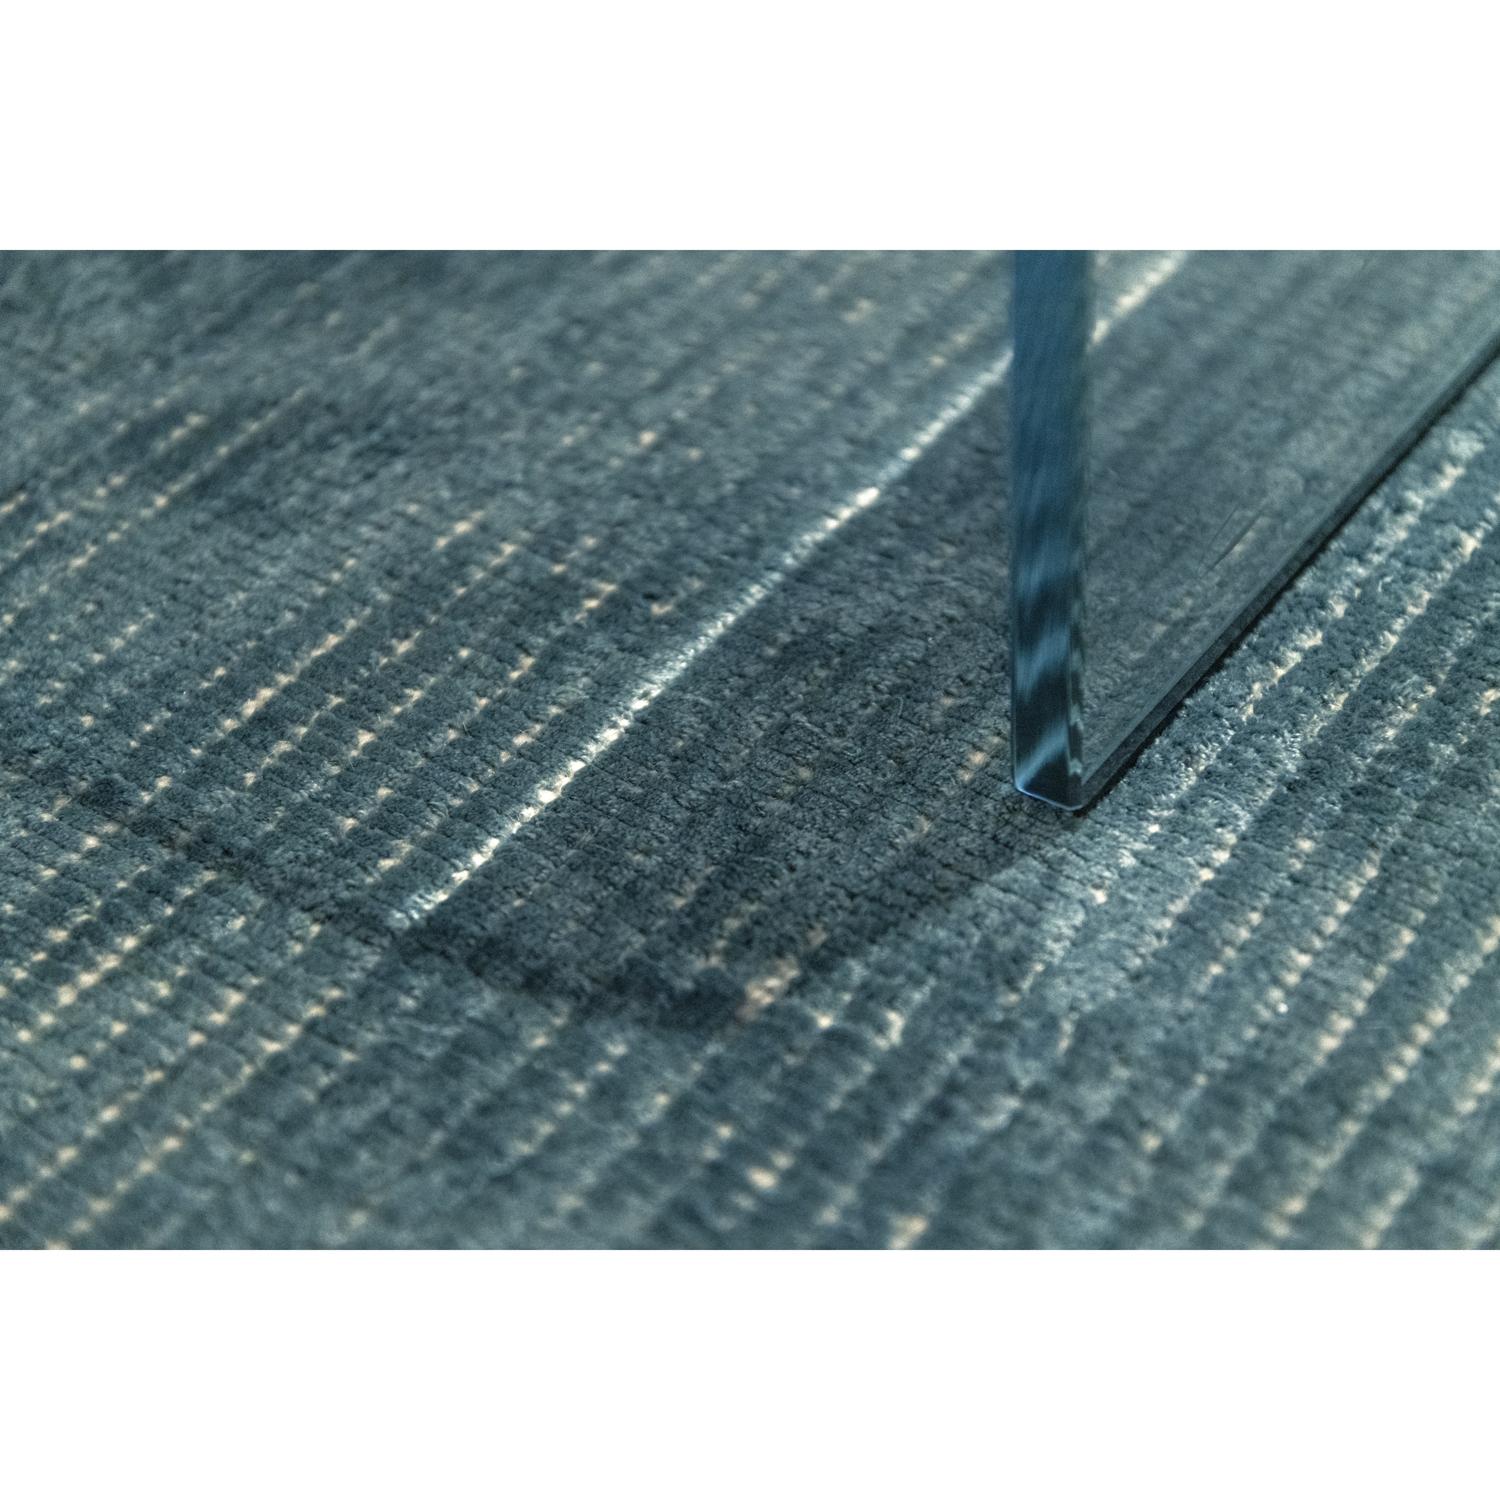 Indian 21st Century Eco-Friendly Velvety Grey Blue Rug by Deanna Comellini 250x350 cm For Sale